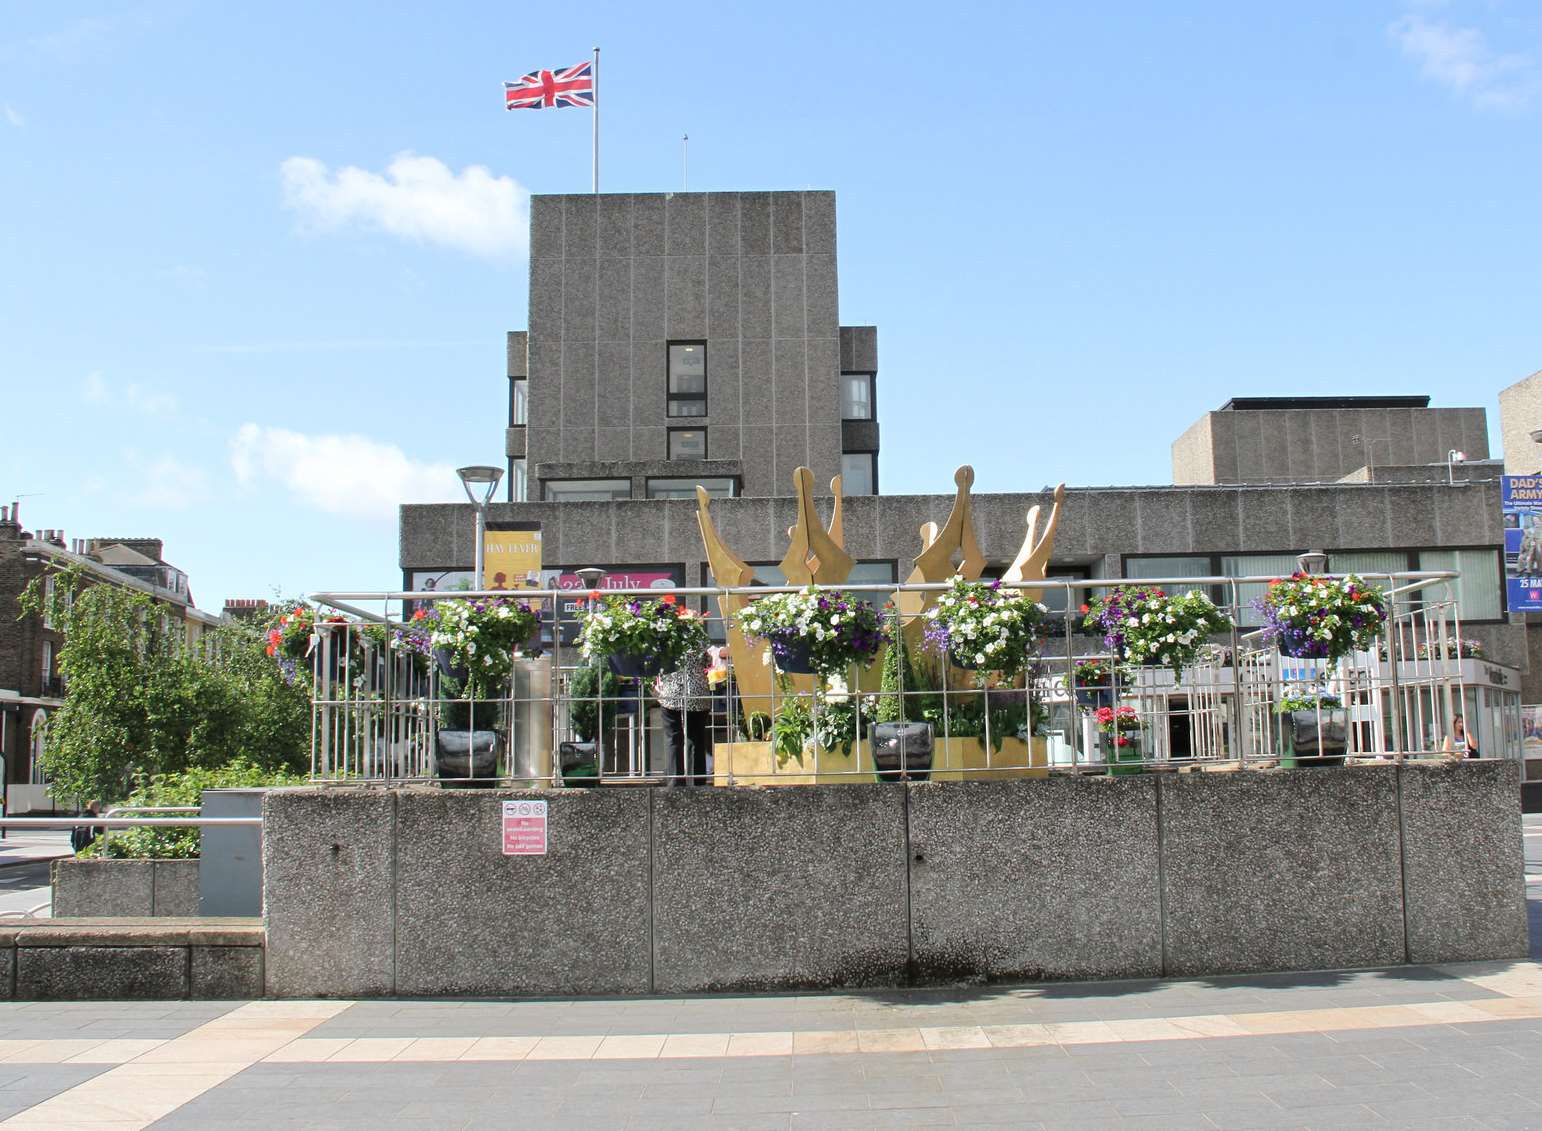 The town had a colourful makeover for Gravesham in Bloom